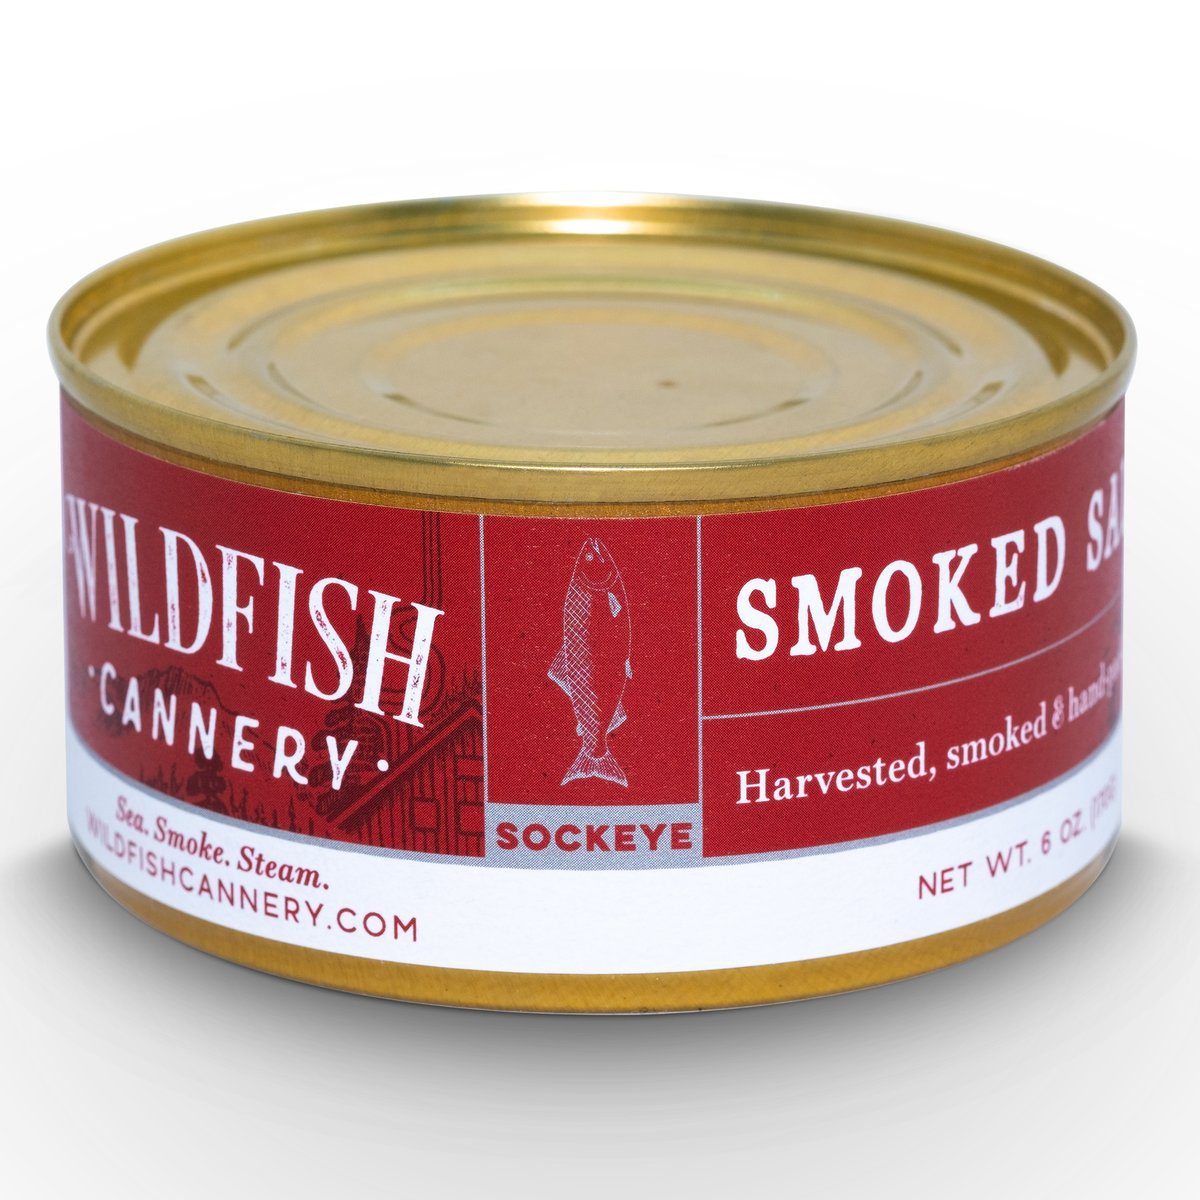 Image of the front of a tin of Wildfish Cannery Smoked Sockeye Salmon